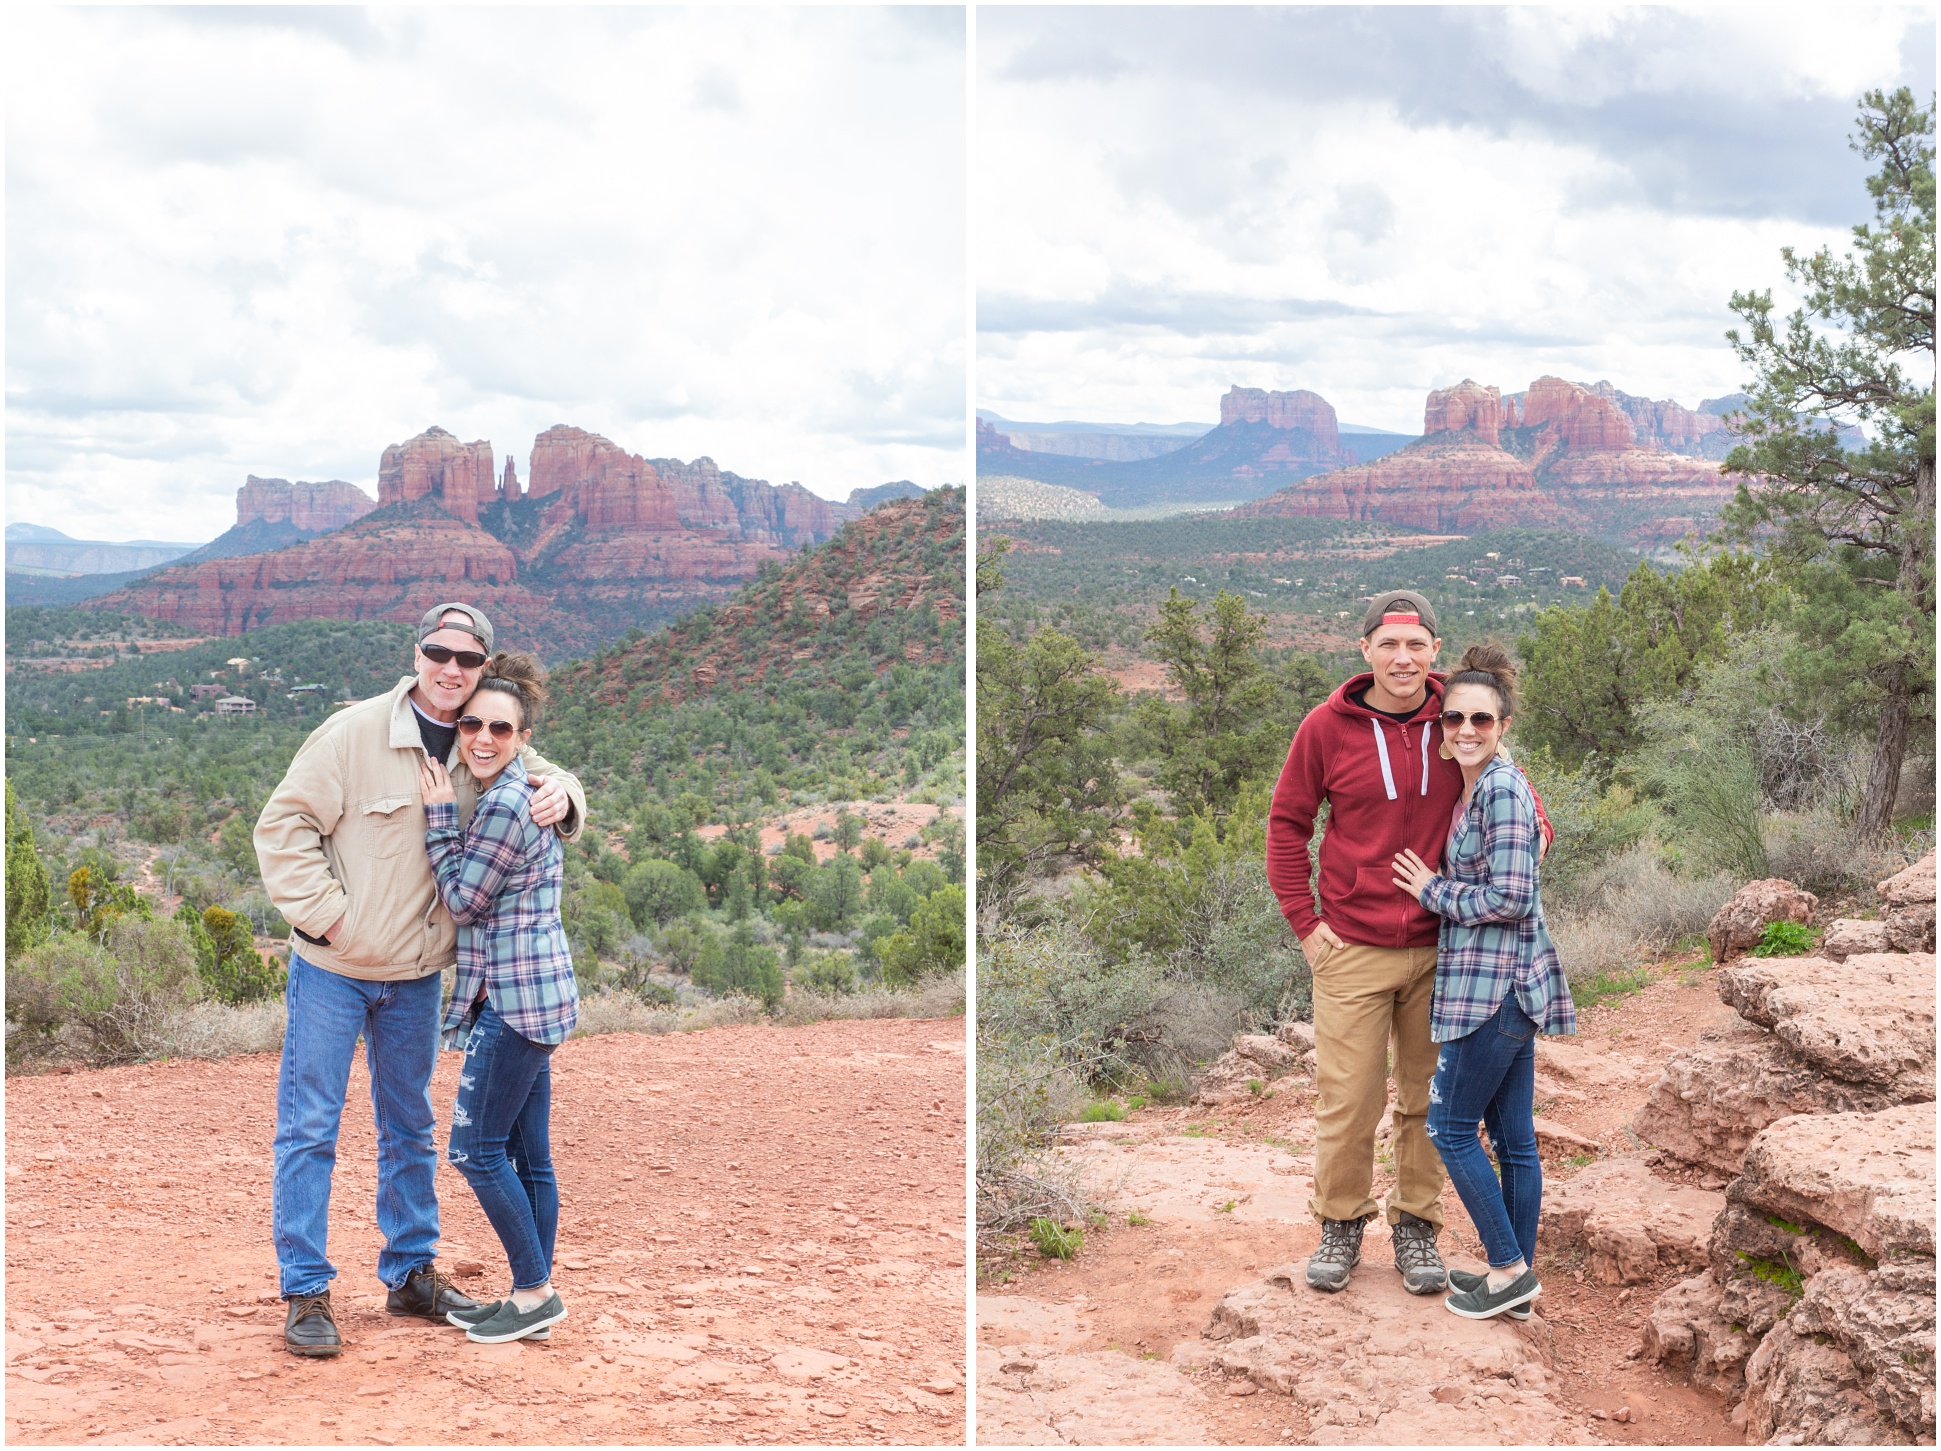 Left: A picture of me and my dad at Lover's Knoll. Right: I picture of my husband and I at Lover's Knoll